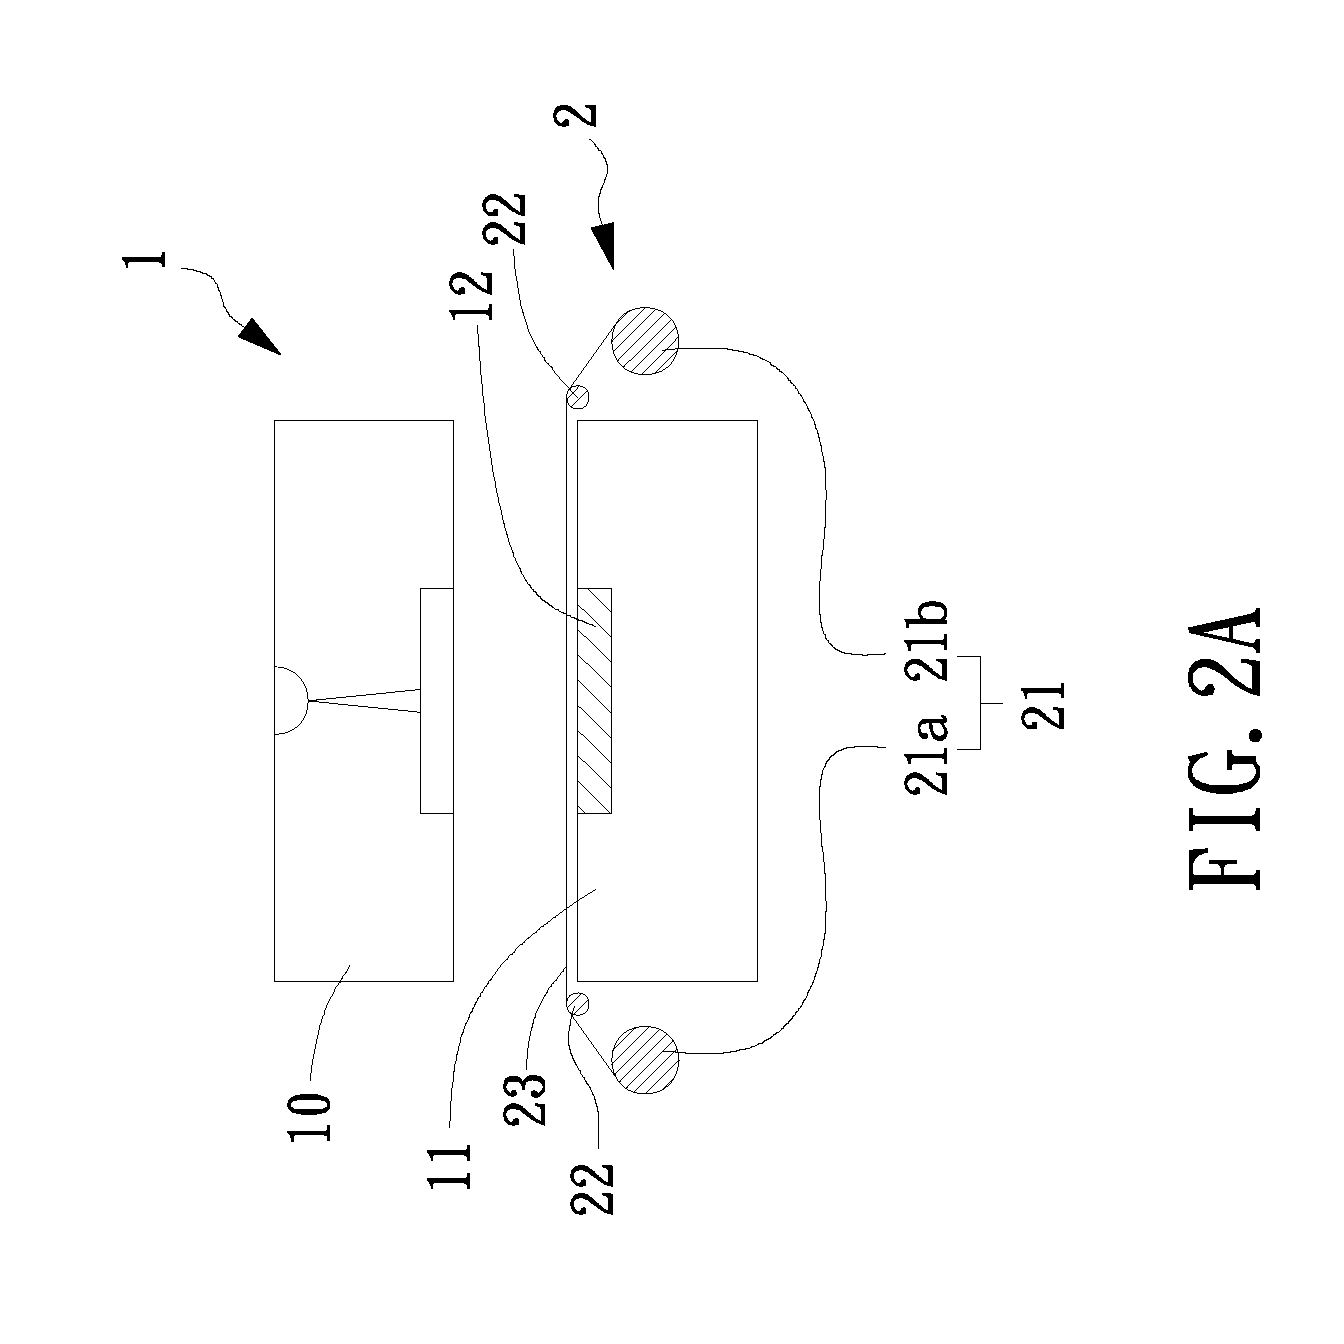 Mold for injection molding and an injection molding device/method with surface quality improvement ability